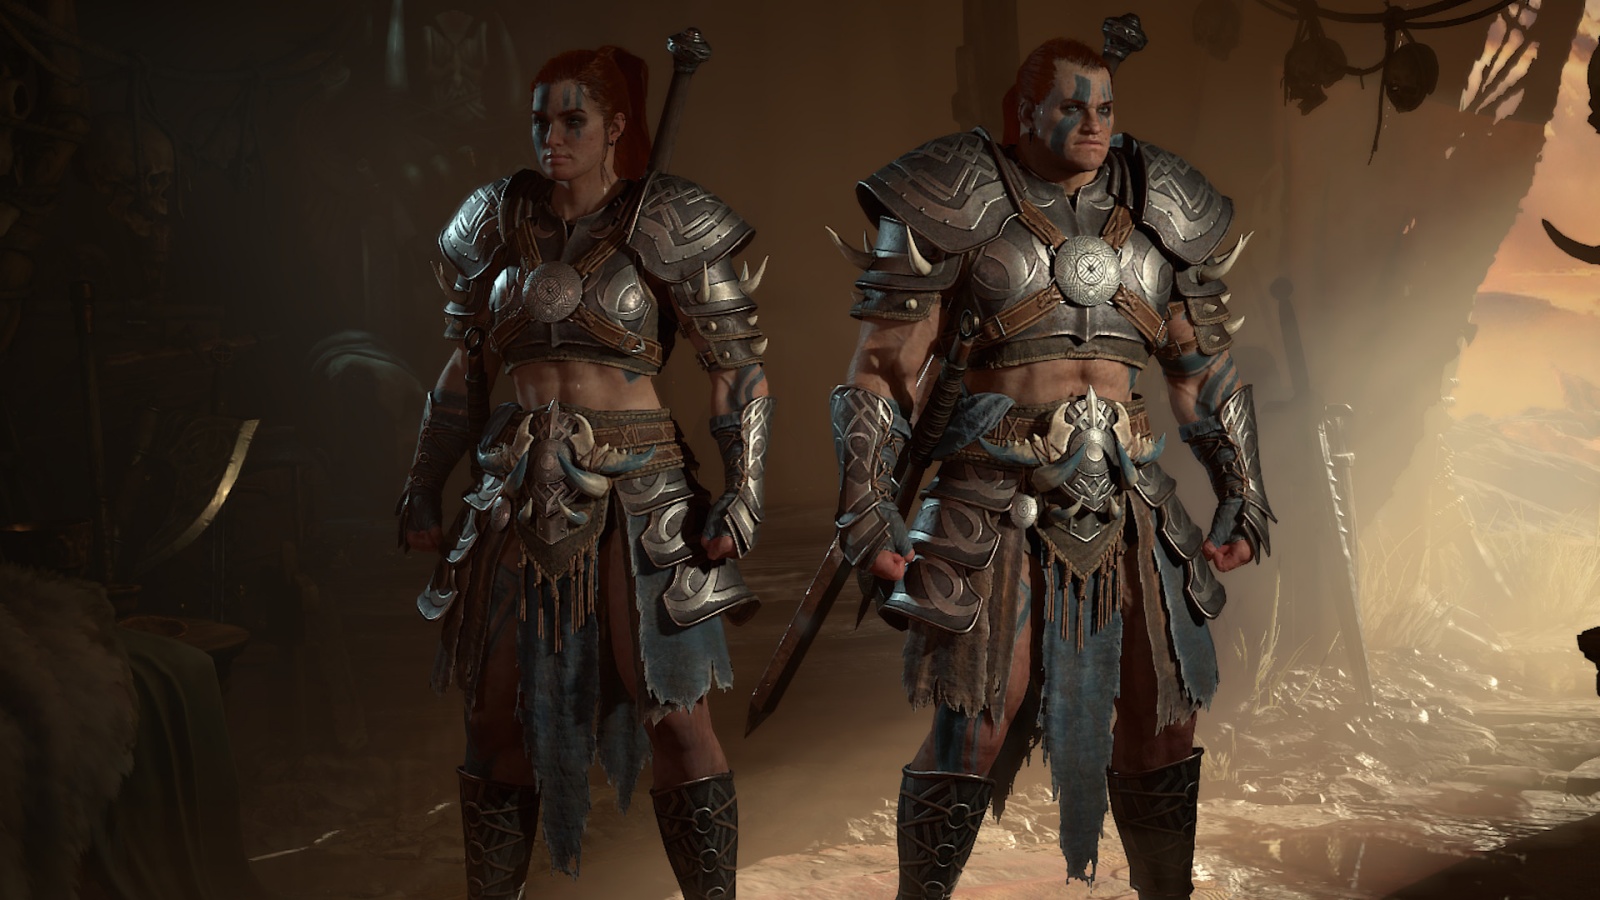 Diablo 4 Players Confused by Limited Customization Options: Is Hairstyle More than Just Looks?